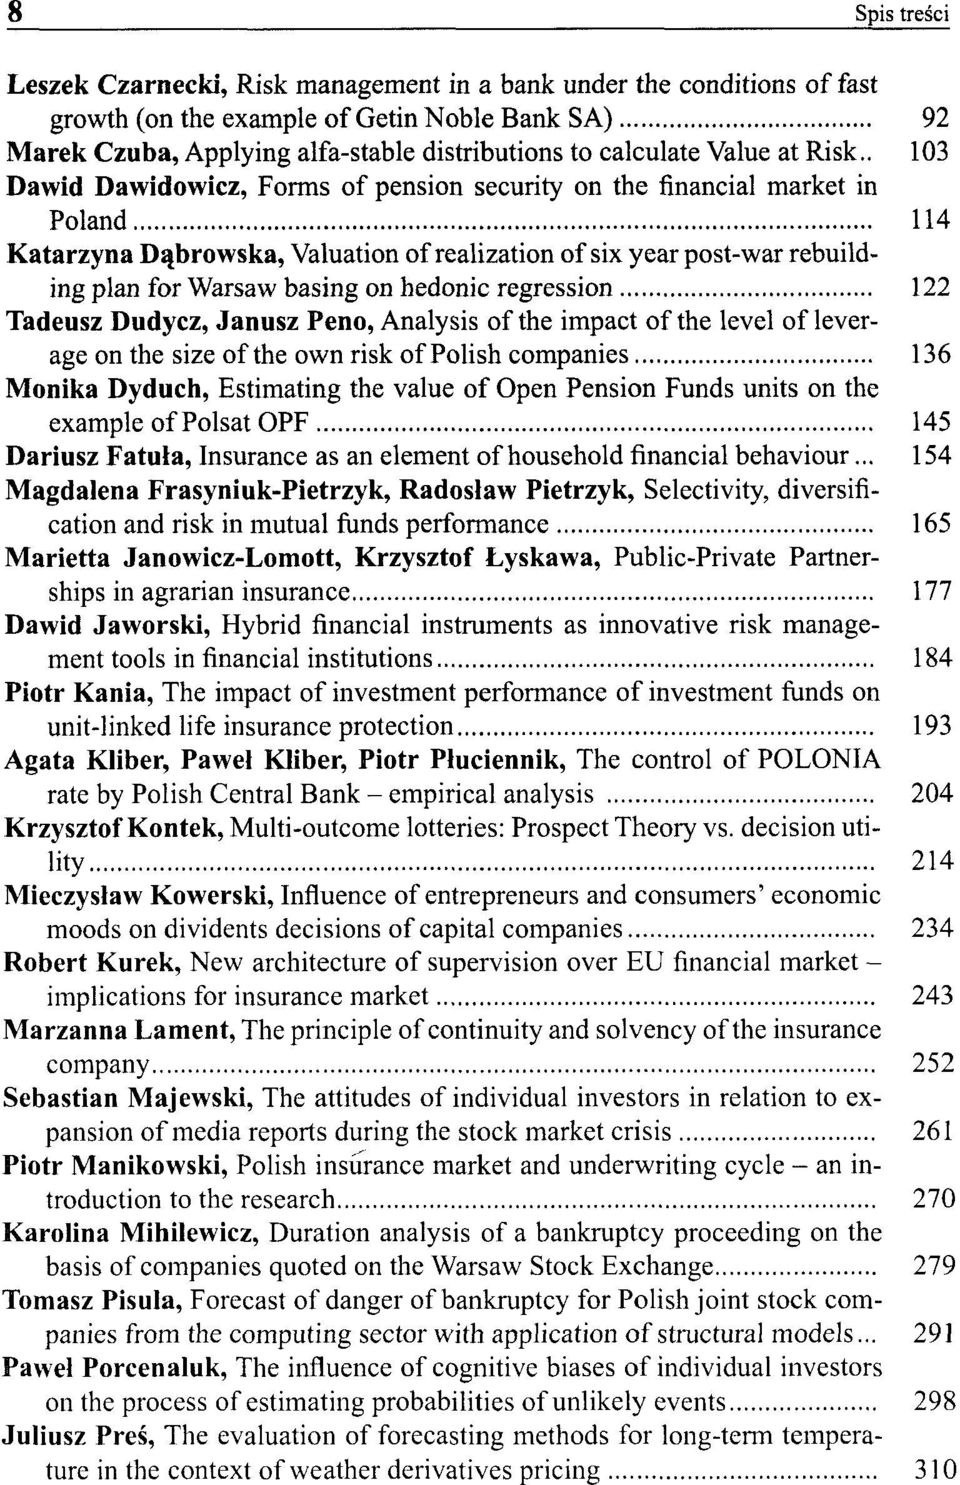 . 103 Dawid Dawidowicz, Forms of pension security on the financial market in Poland 114 Katarzyna Dąbrowska, Valuation of realization of six year post-war rebuildingplan for Warsaw basing onhedonic